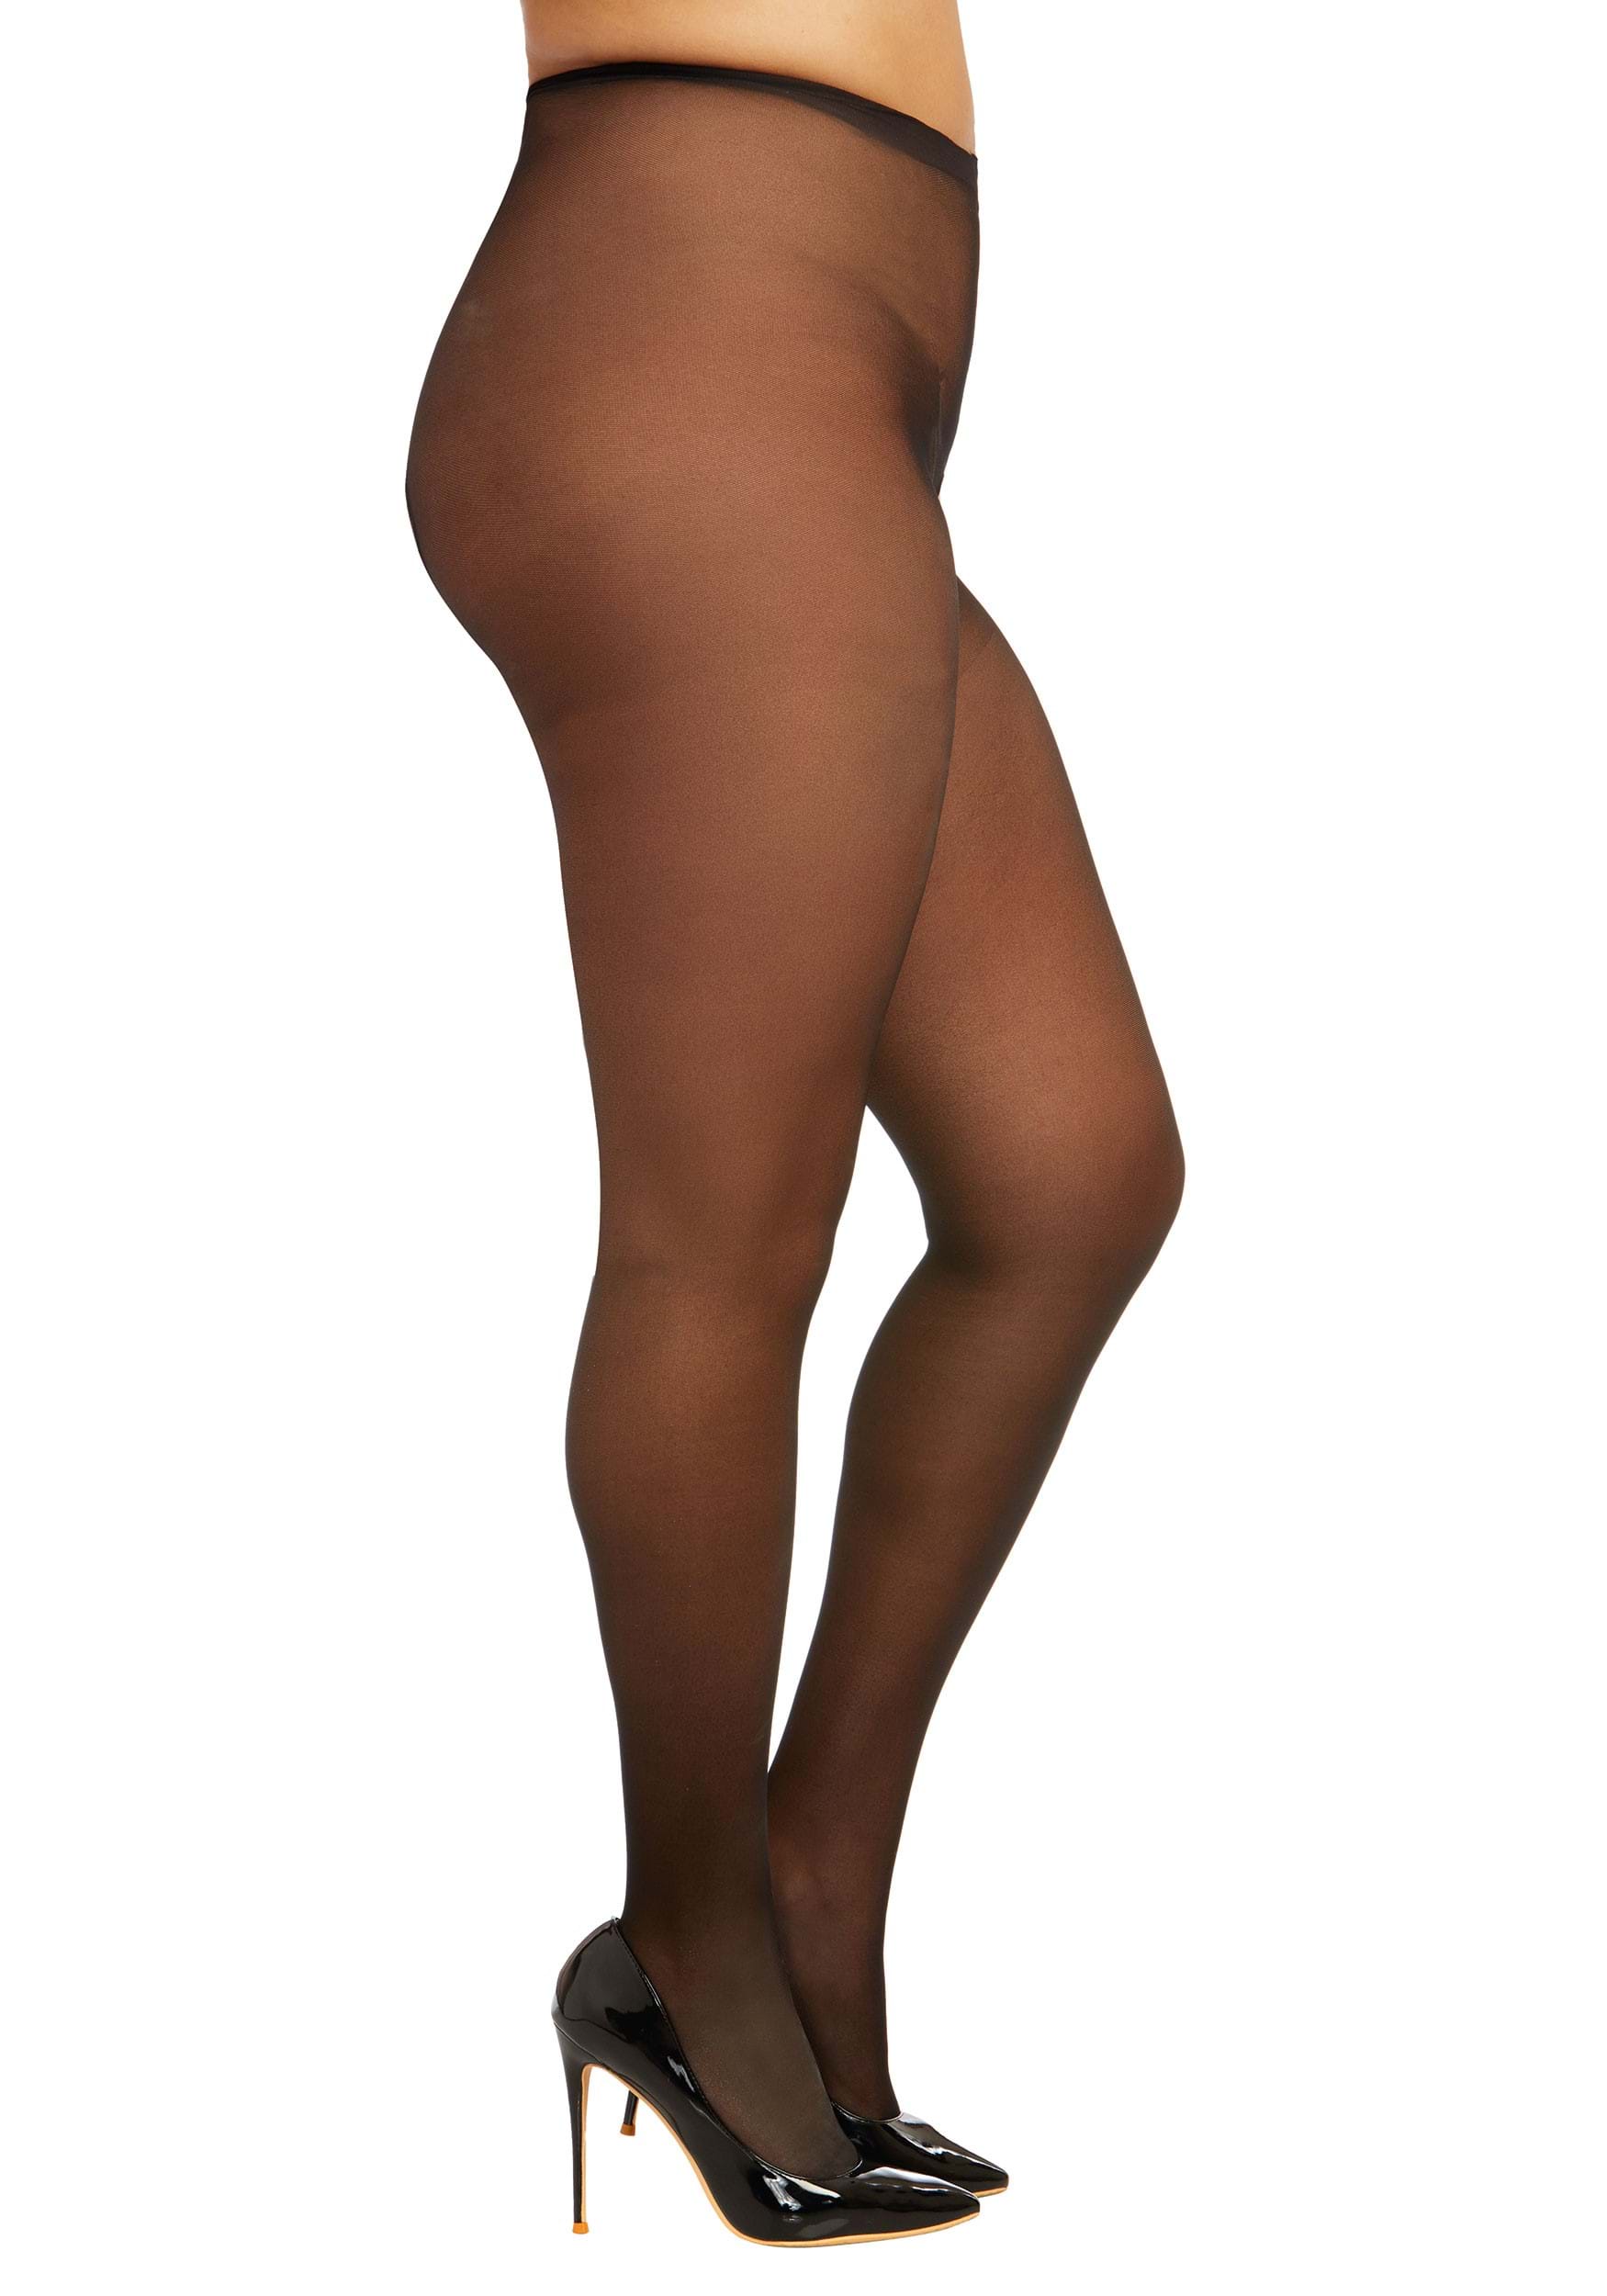 Plus size tights for women • Compare best prices »